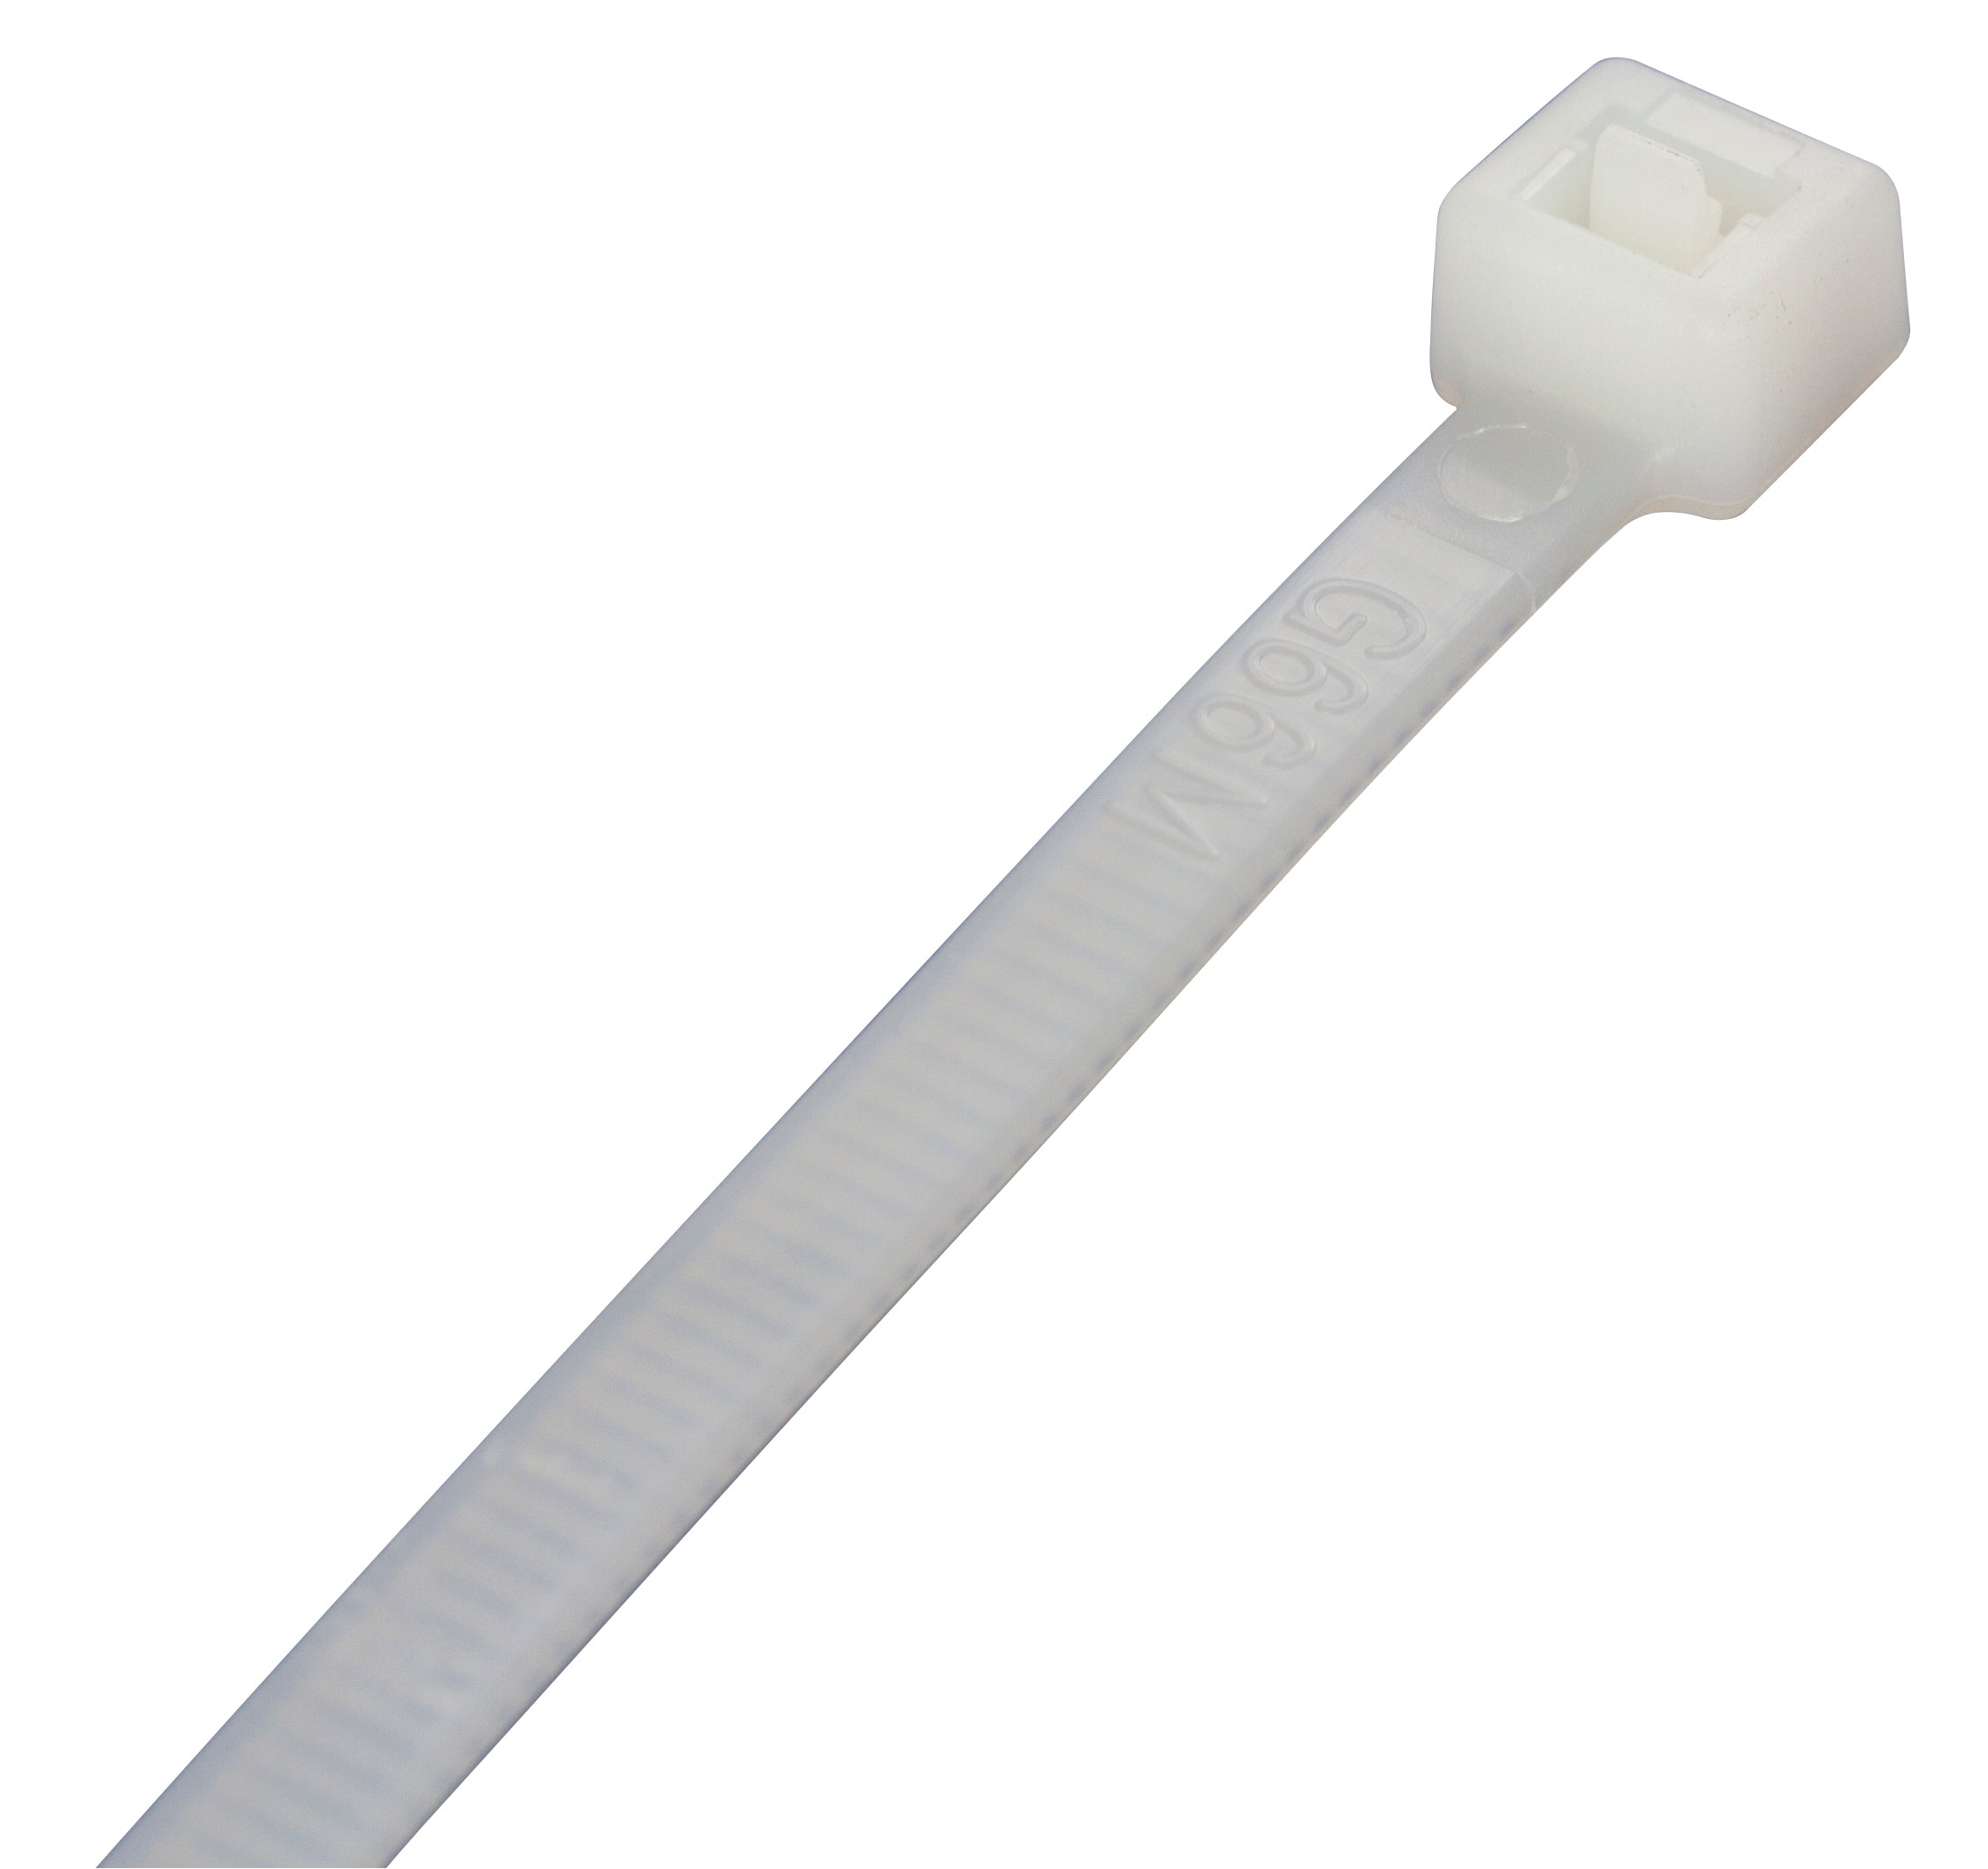 Premium Natural Cable Ties 450mm x 4.8mm - Pack of 100